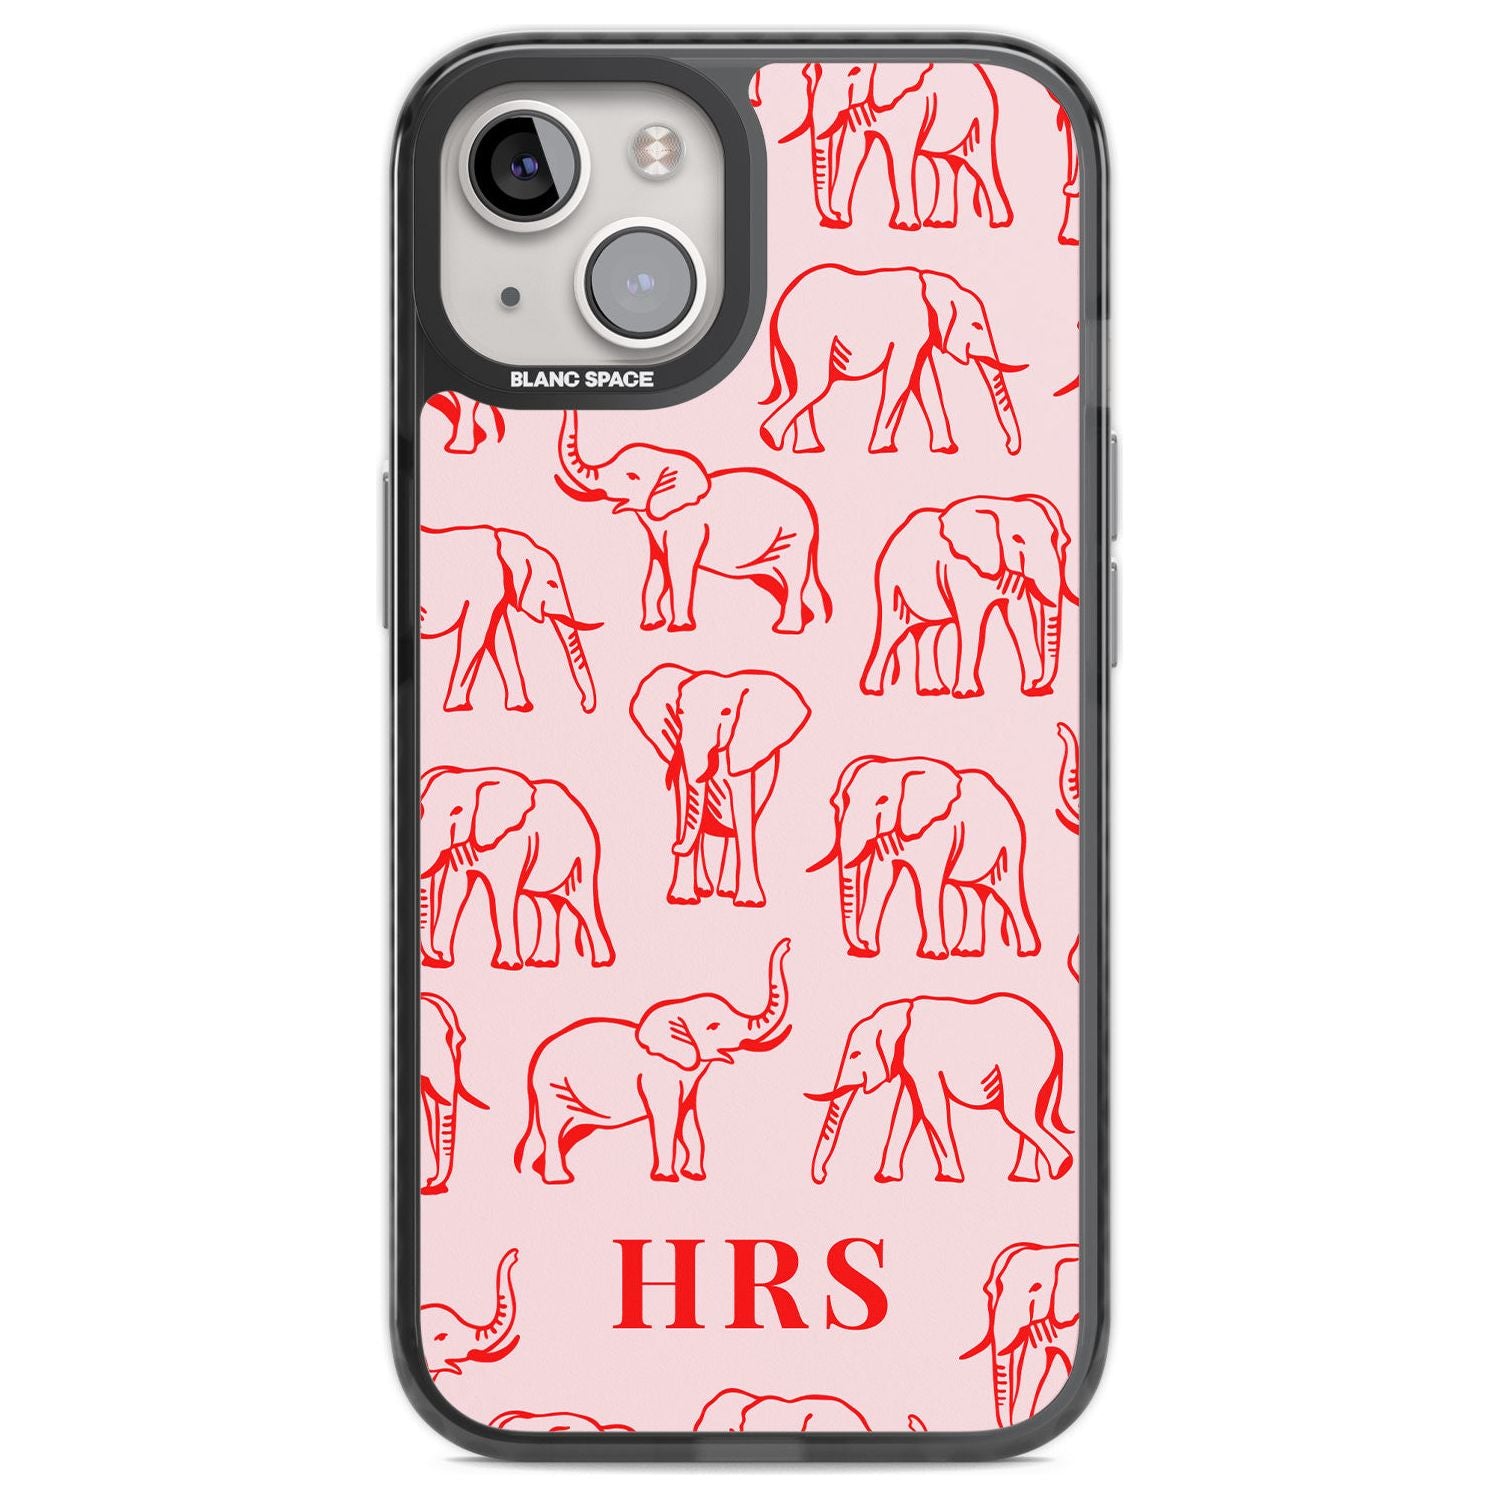 Personalised Red Elephant Outlines on Pink Custom Phone Case iPhone 12 / Black Impact Case,iPhone 13 / Black Impact Case,iPhone 12 Pro / Black Impact Case,iPhone 14 / Black Impact Case,iPhone 15 Plus / Black Impact Case,iPhone 15 / Black Impact Case Blanc Space